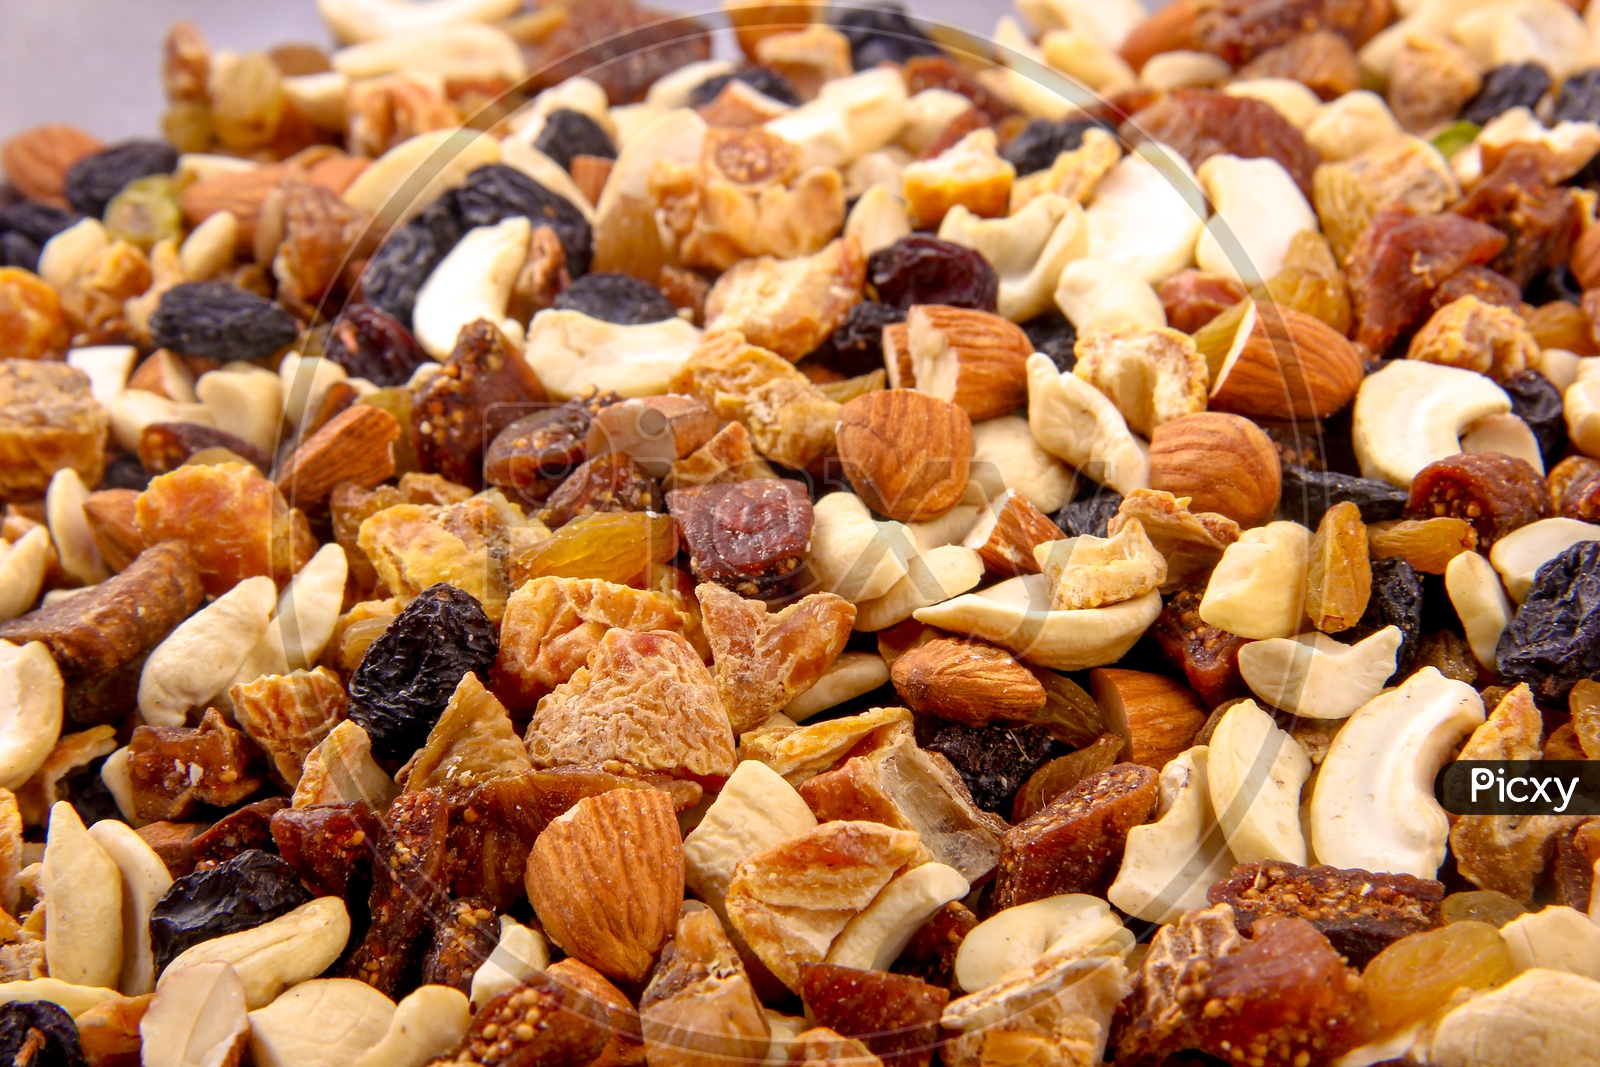 Mixed Dry Fruits